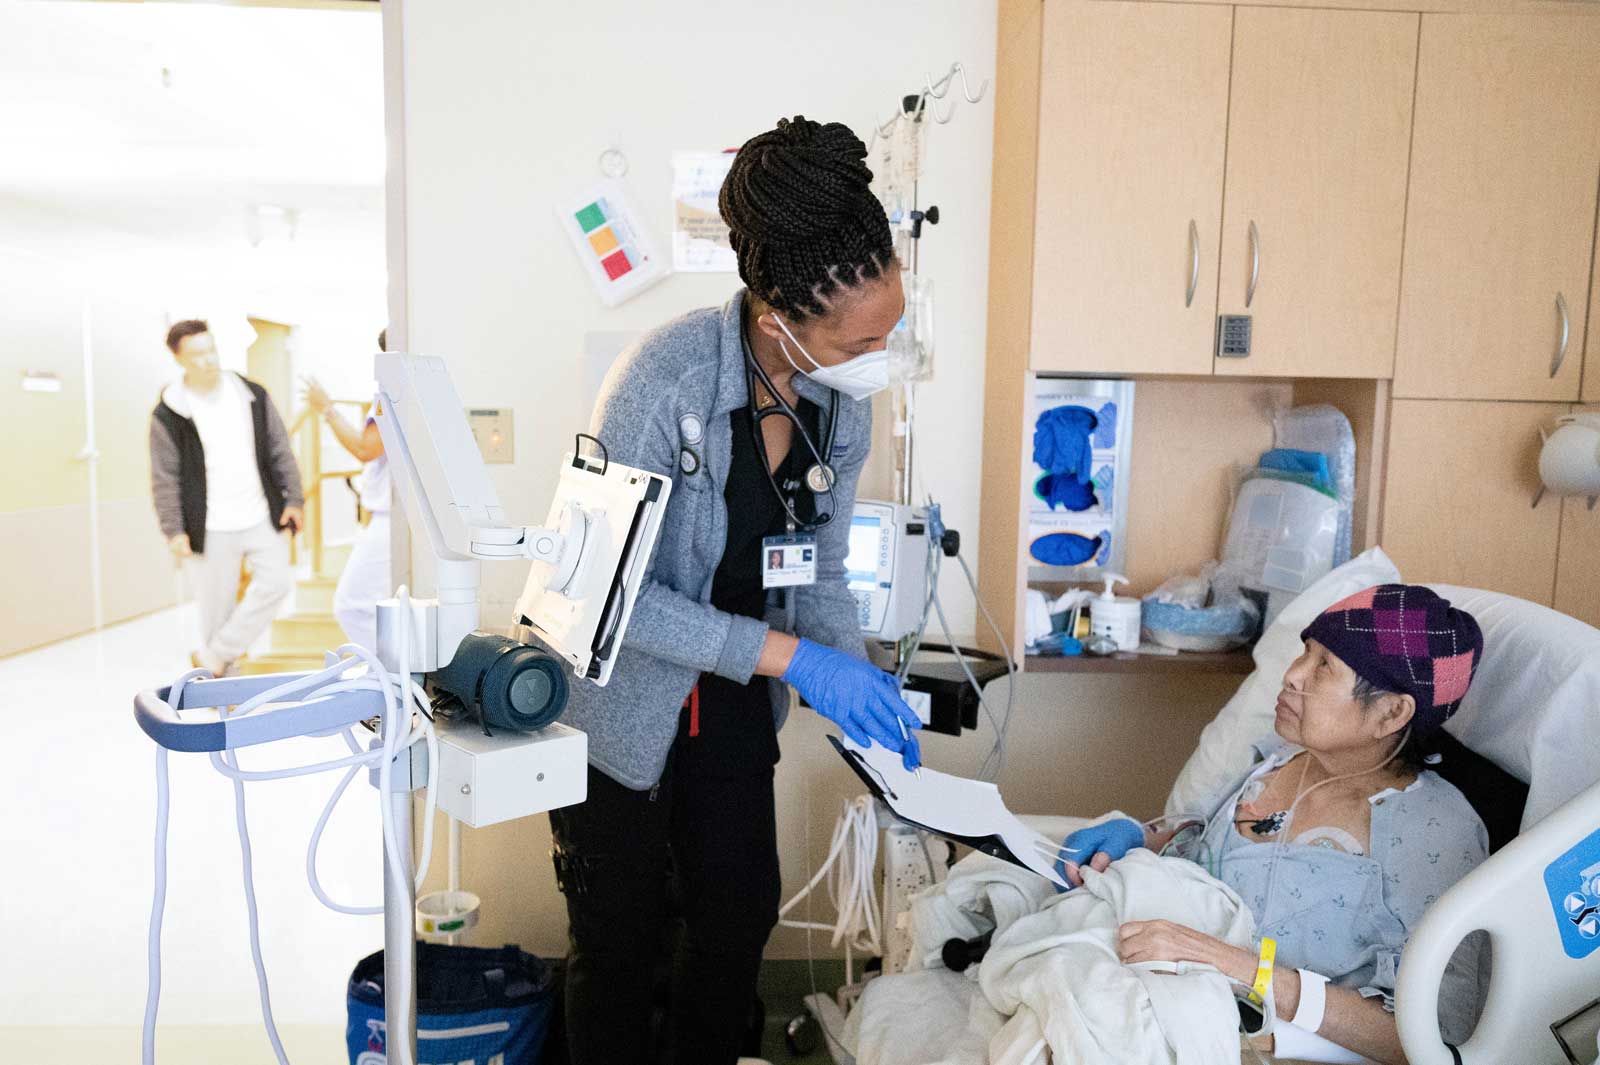 First-year resident Kelechi shows a patient paperwork on a clipboard. The patient is an elderly woman of Asian descent, and wears a beanie and hospital gown as she lies in hospital bed.